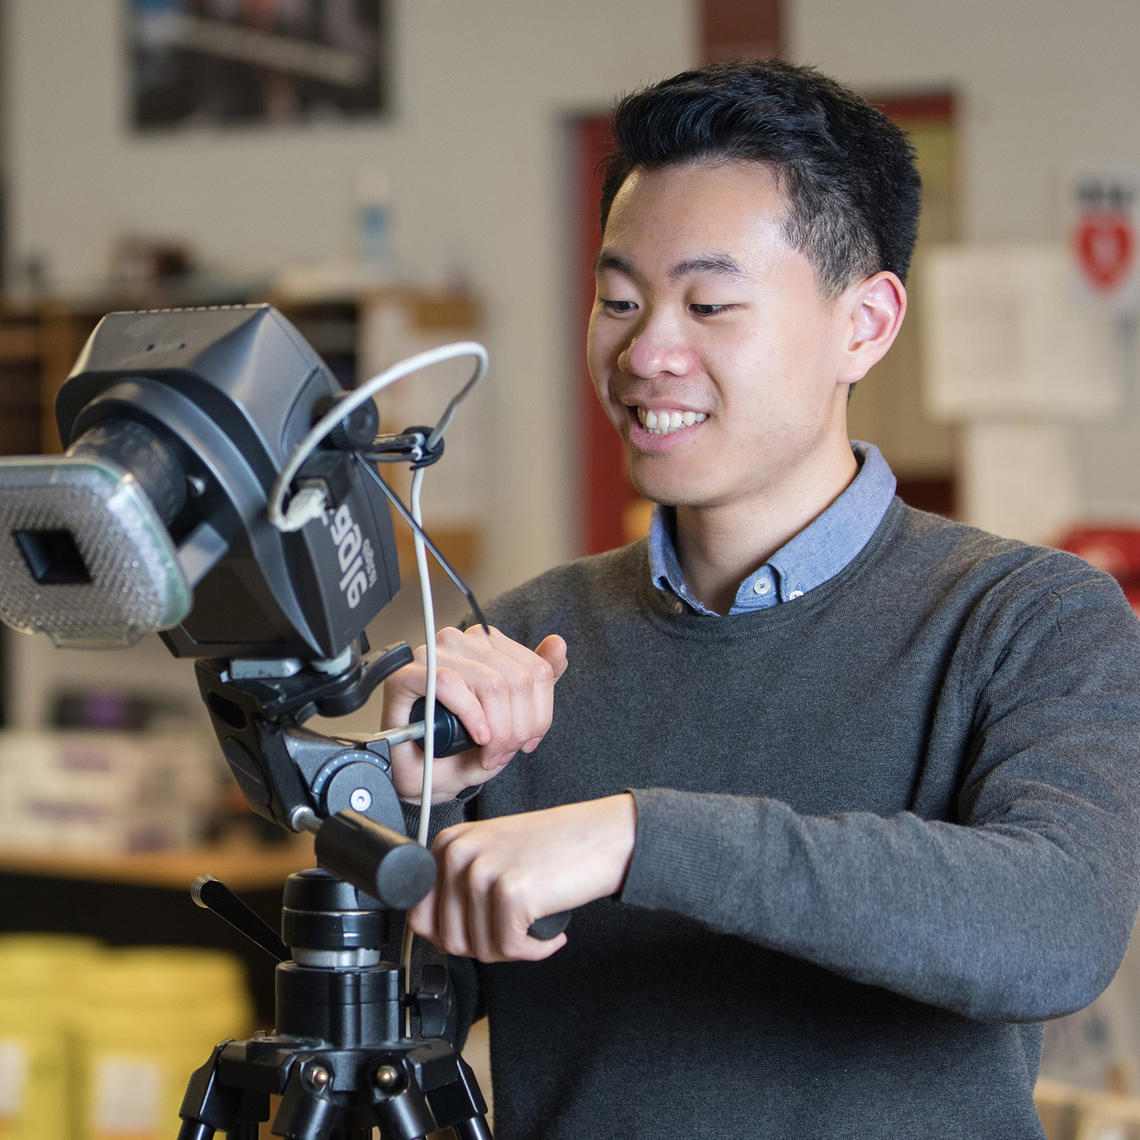 Mathieu Chin conducts research as part of his experiential learning